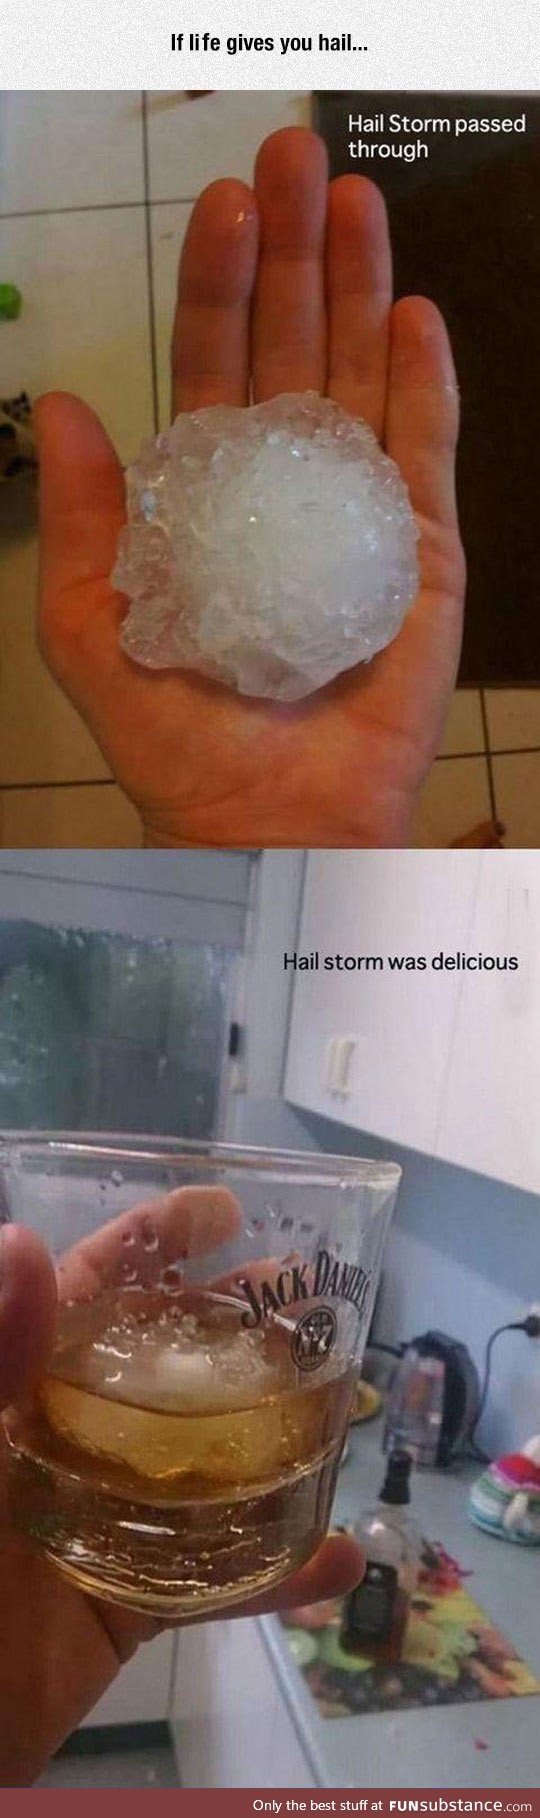 When life gives you hail